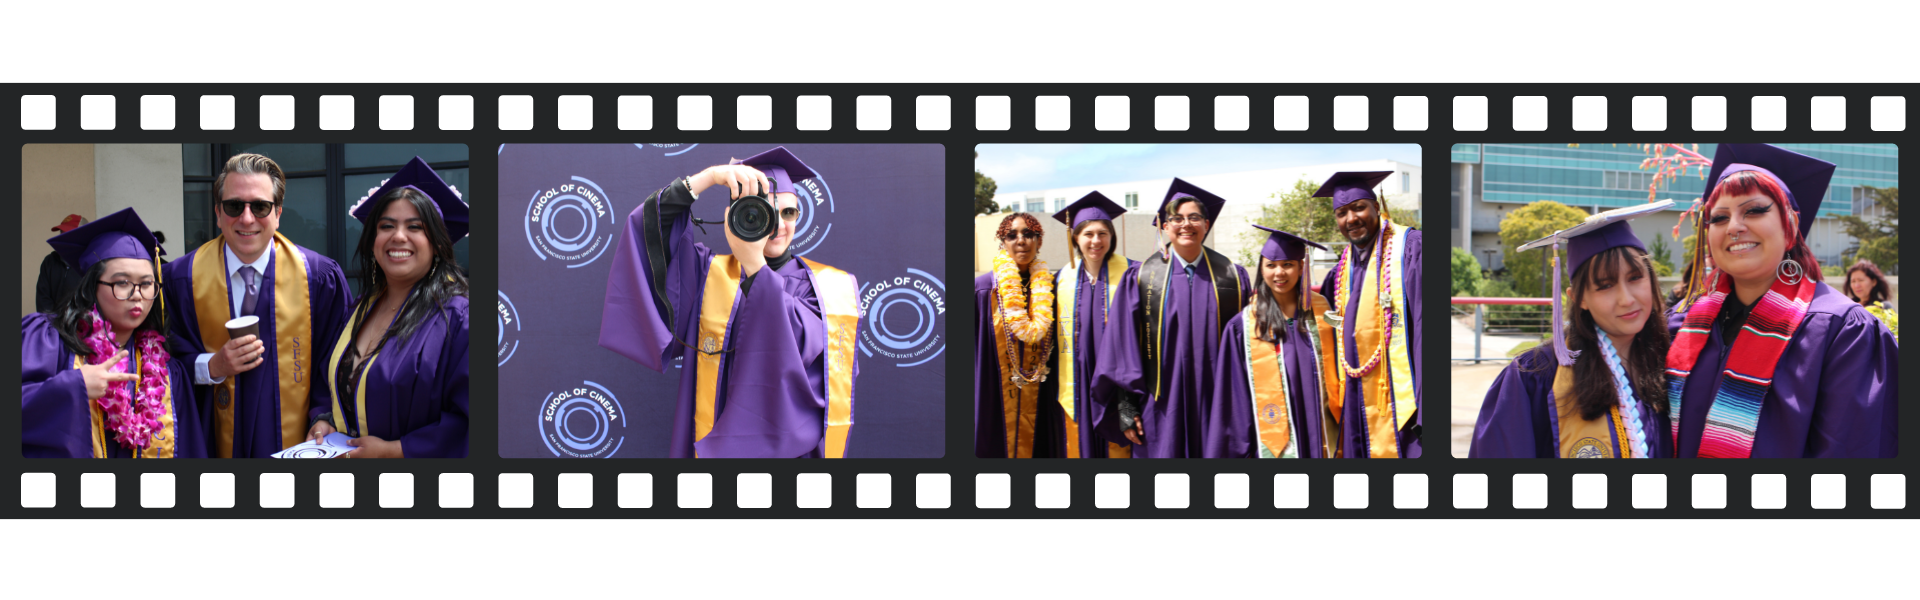 Cinema graduates in cap and gown with film strip border